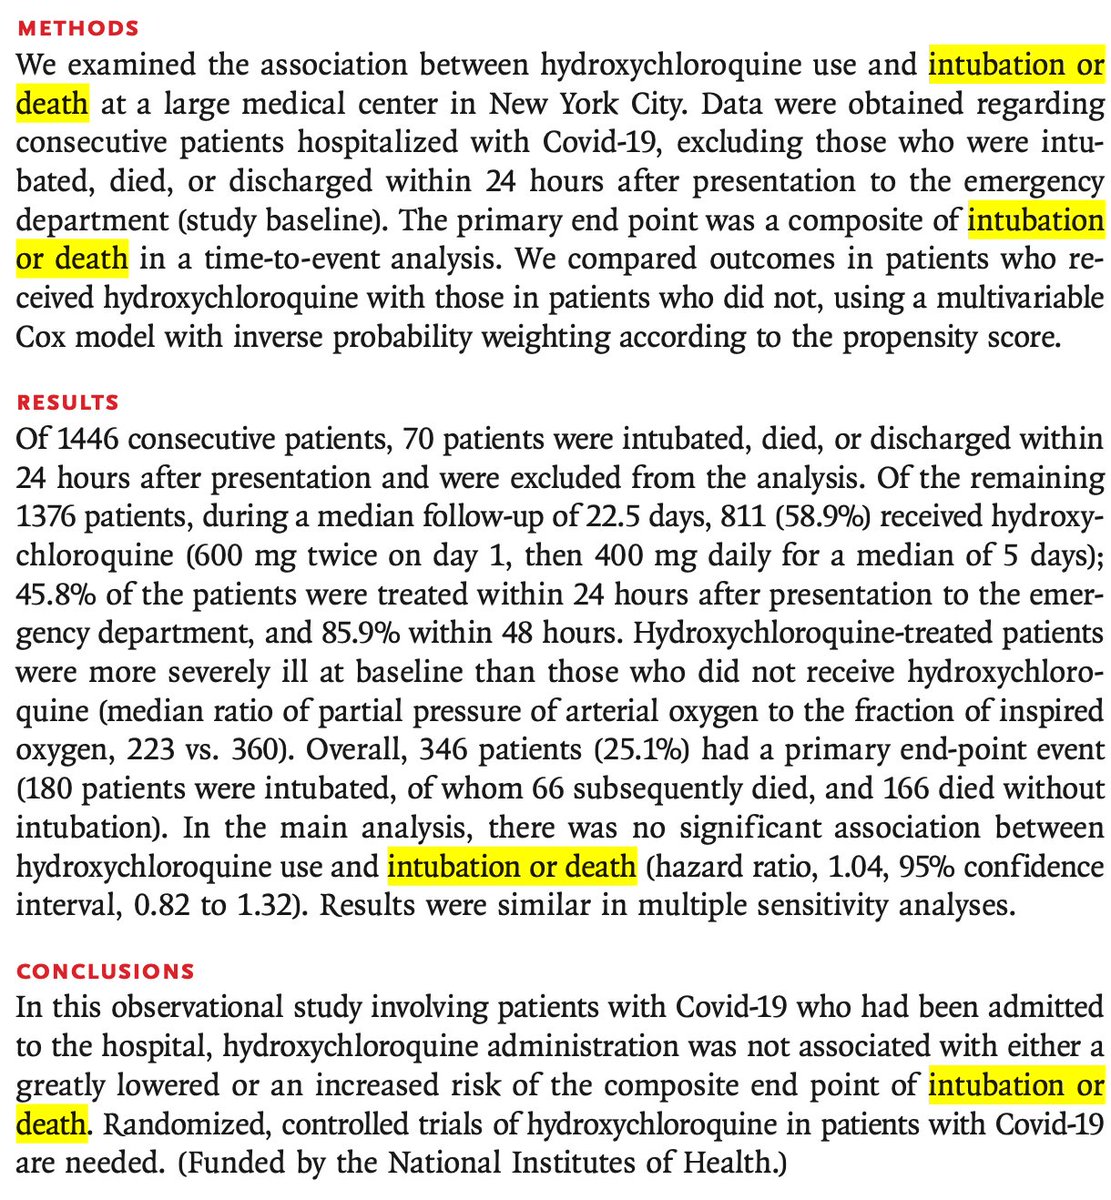 So far, so good.But now, here is the dirty trick. The authors decided to study the “intubation or death” endpoint, AS A WHOLE, which means the “intubation” event, *no matter whether the patient eventually survived* and the “death” event are considered equally.